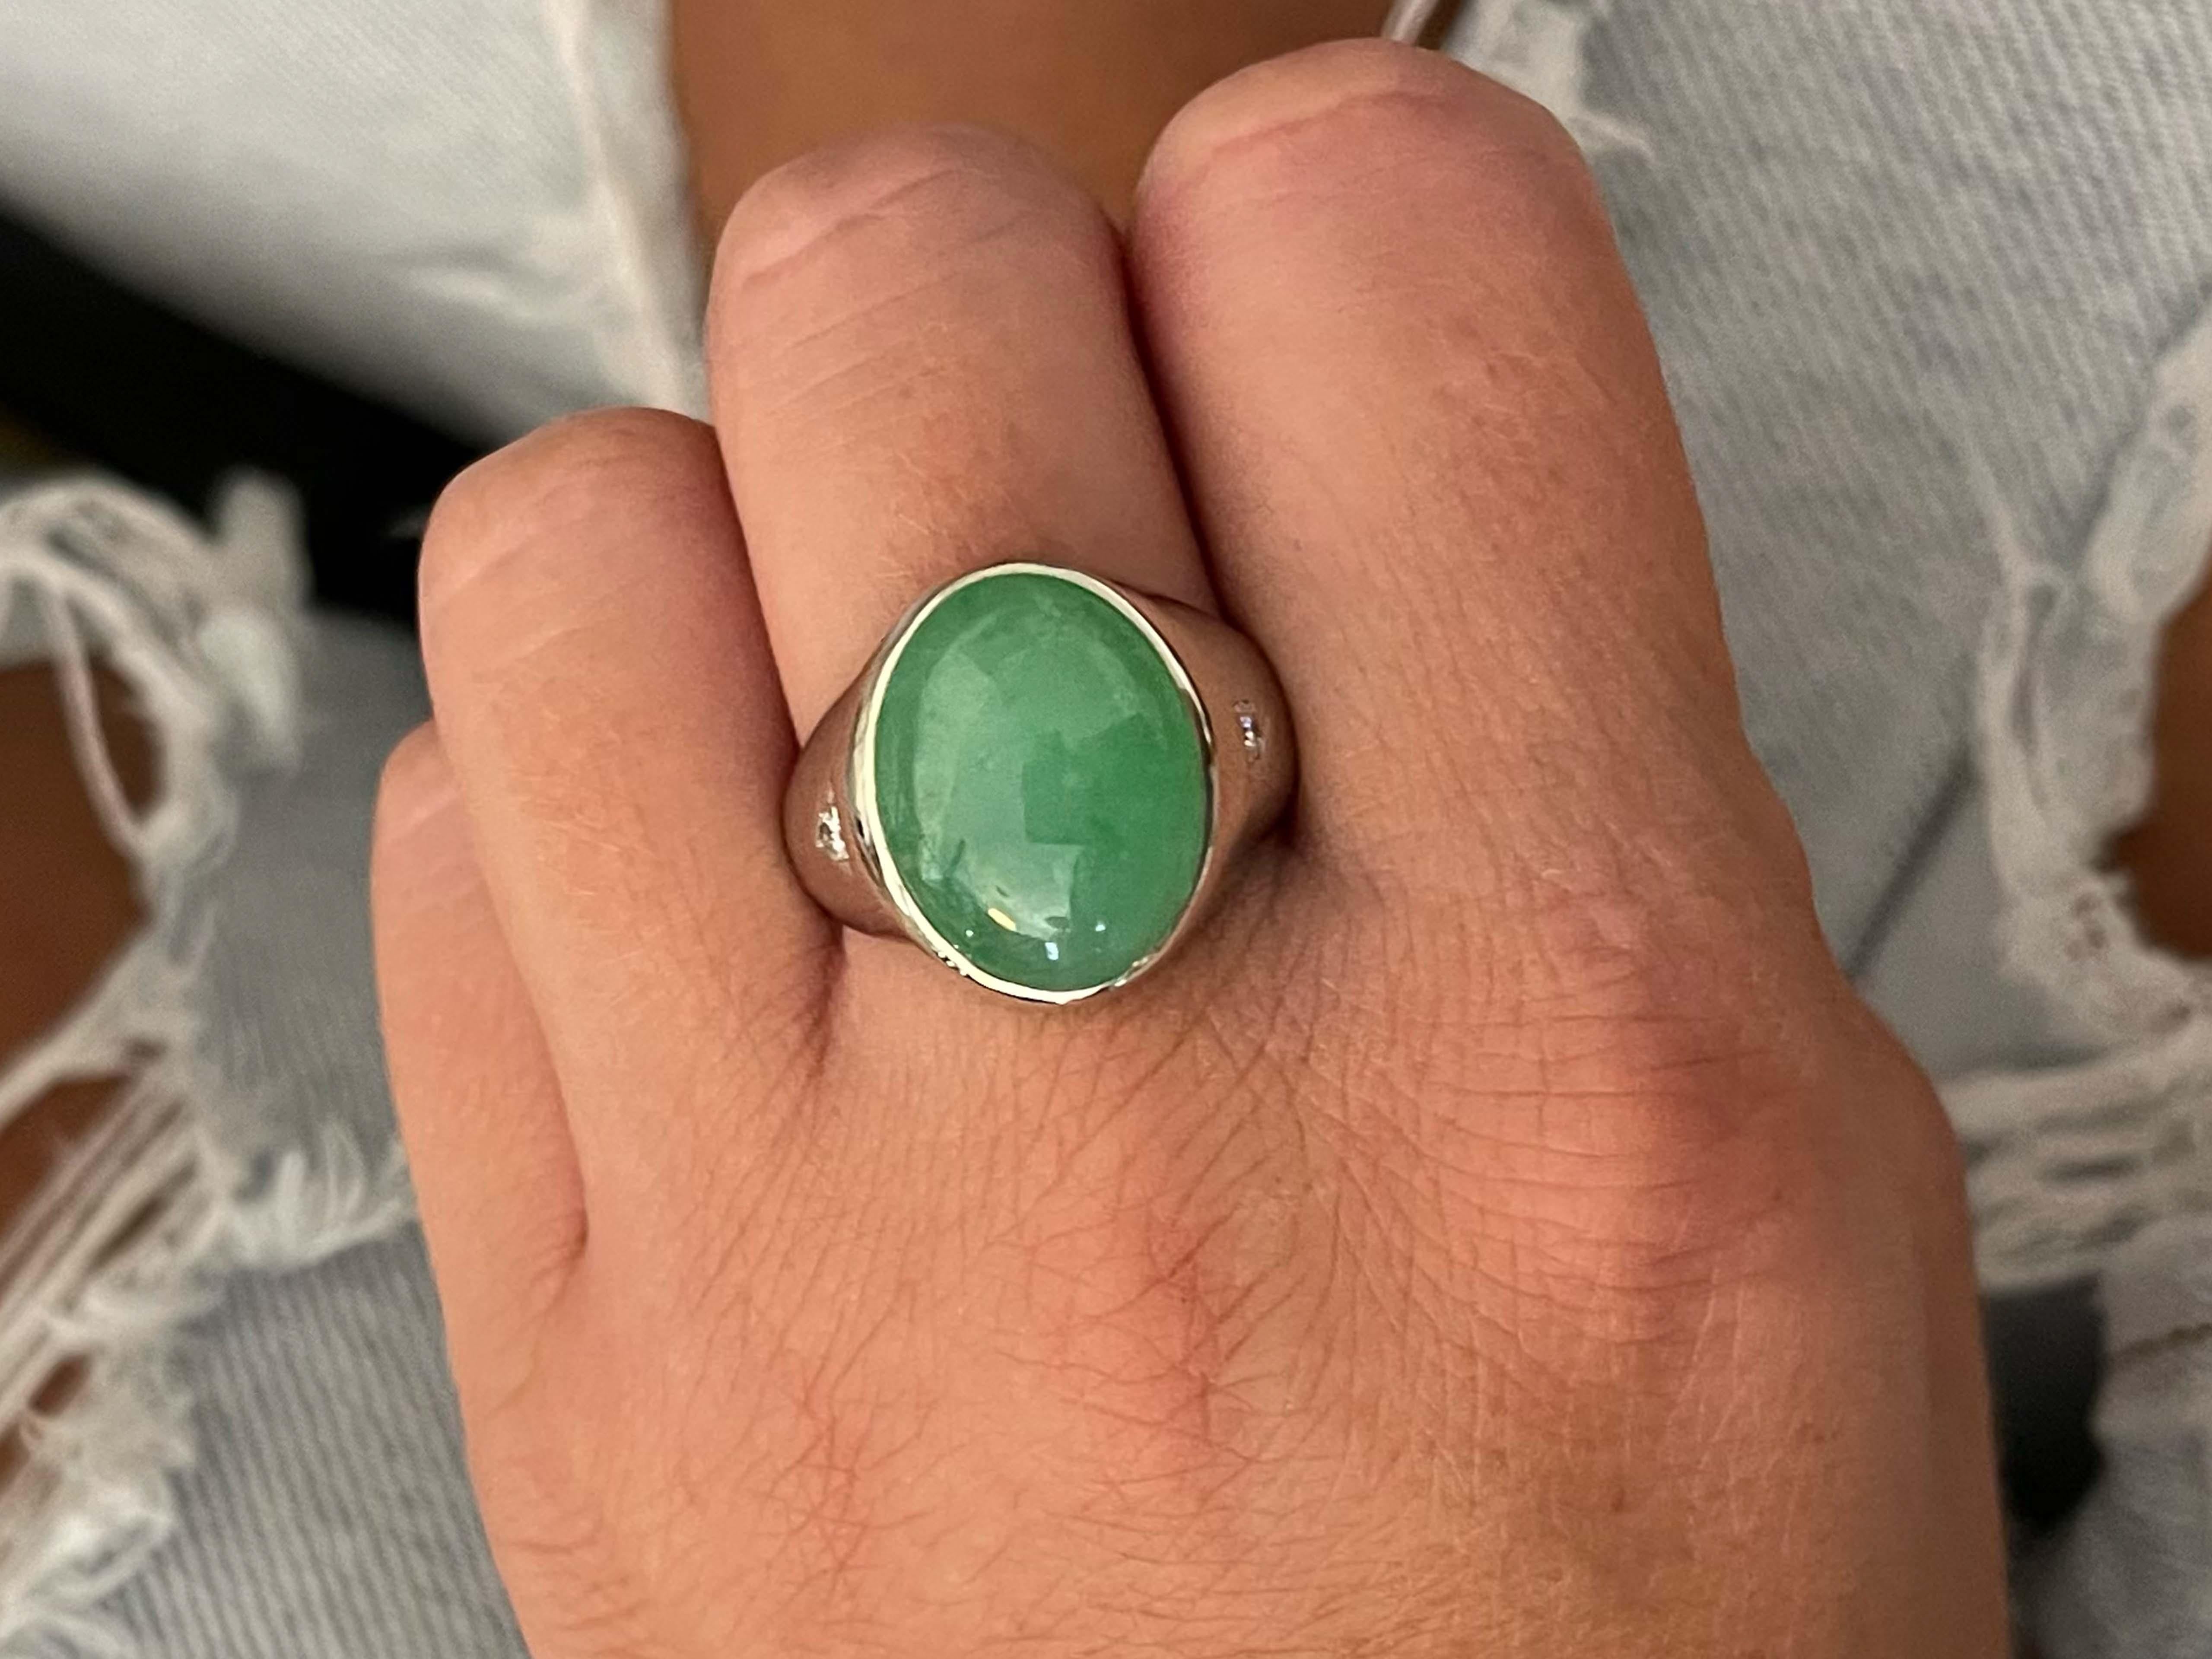 Item Specifications:

Metal: 14k White Gold 

Style: Statement Ring

Ring Size: 10.25 (resizing available for a fee)

Total Weight: 15.5 Grams

Gemstone Specifications:

Center Gemstone: Jadeite Jade

Shape: Oval

Color: Green

Cut: Cabochon 

Jade